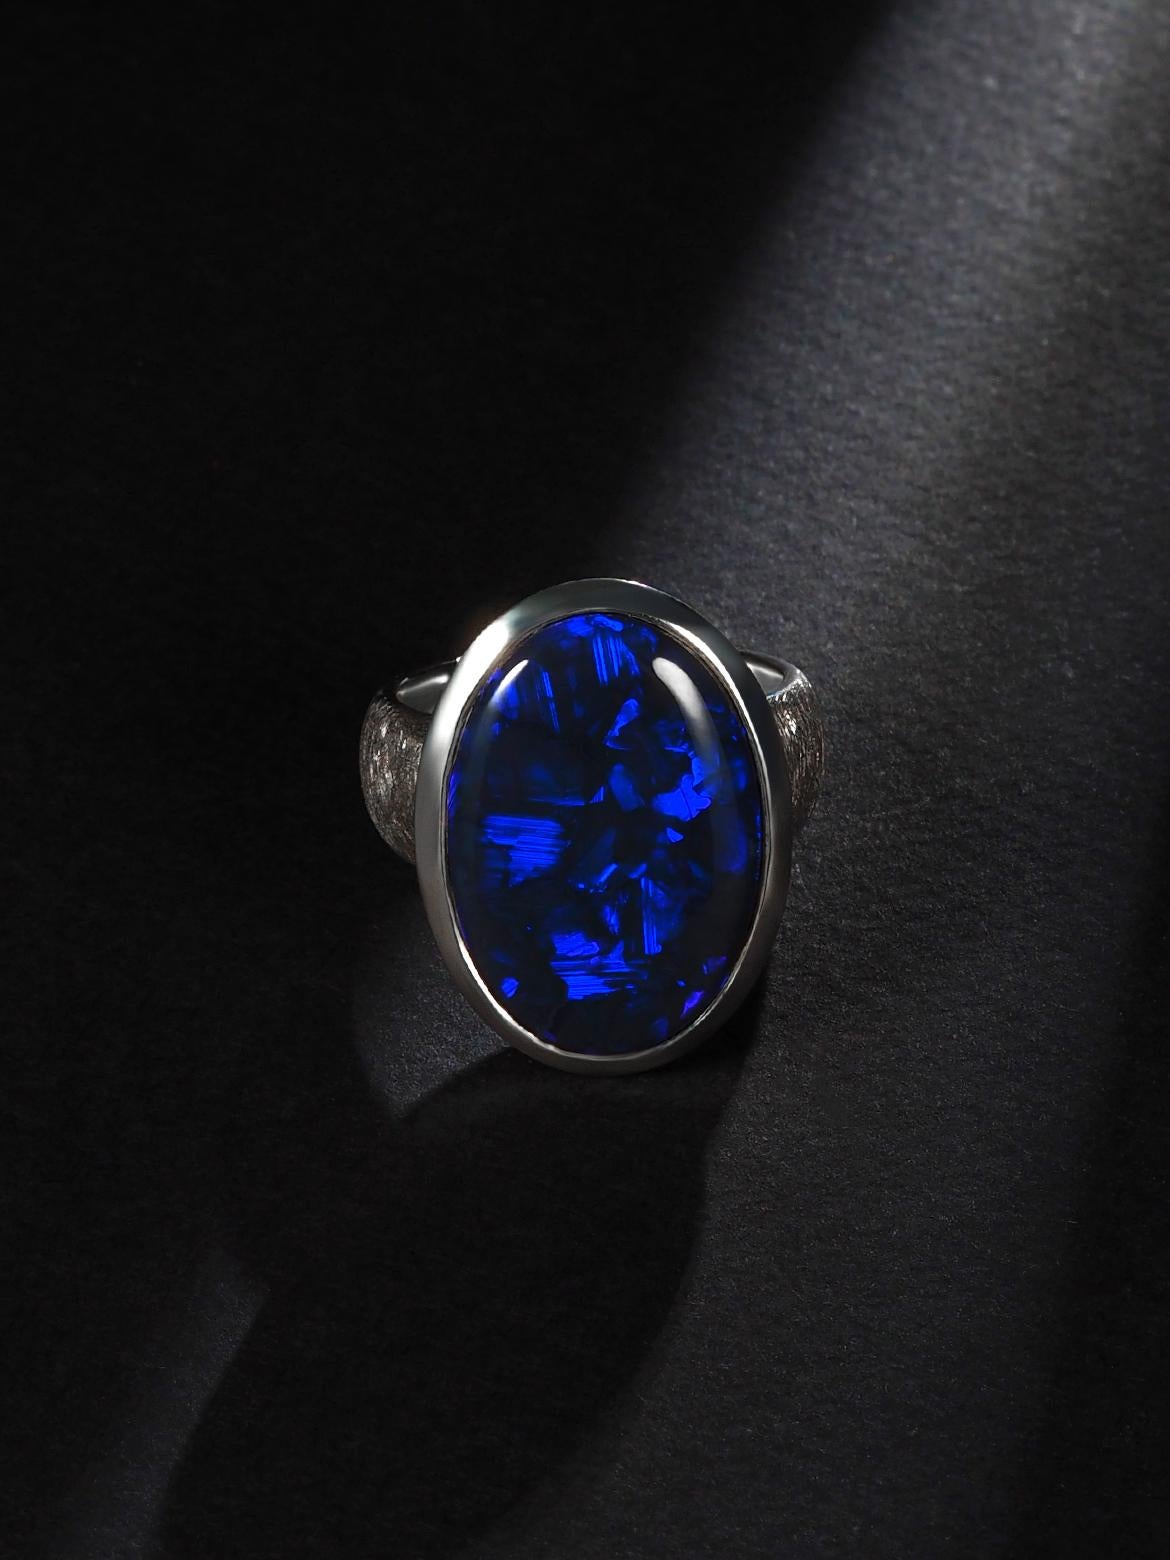 A stunning and unique piece, this large black opal ring showcases the captivating beauty of Australian opals. The opal displays a mesmerizing play of colors, with deep hues of neon blue shining through against a dark background.

The opal is